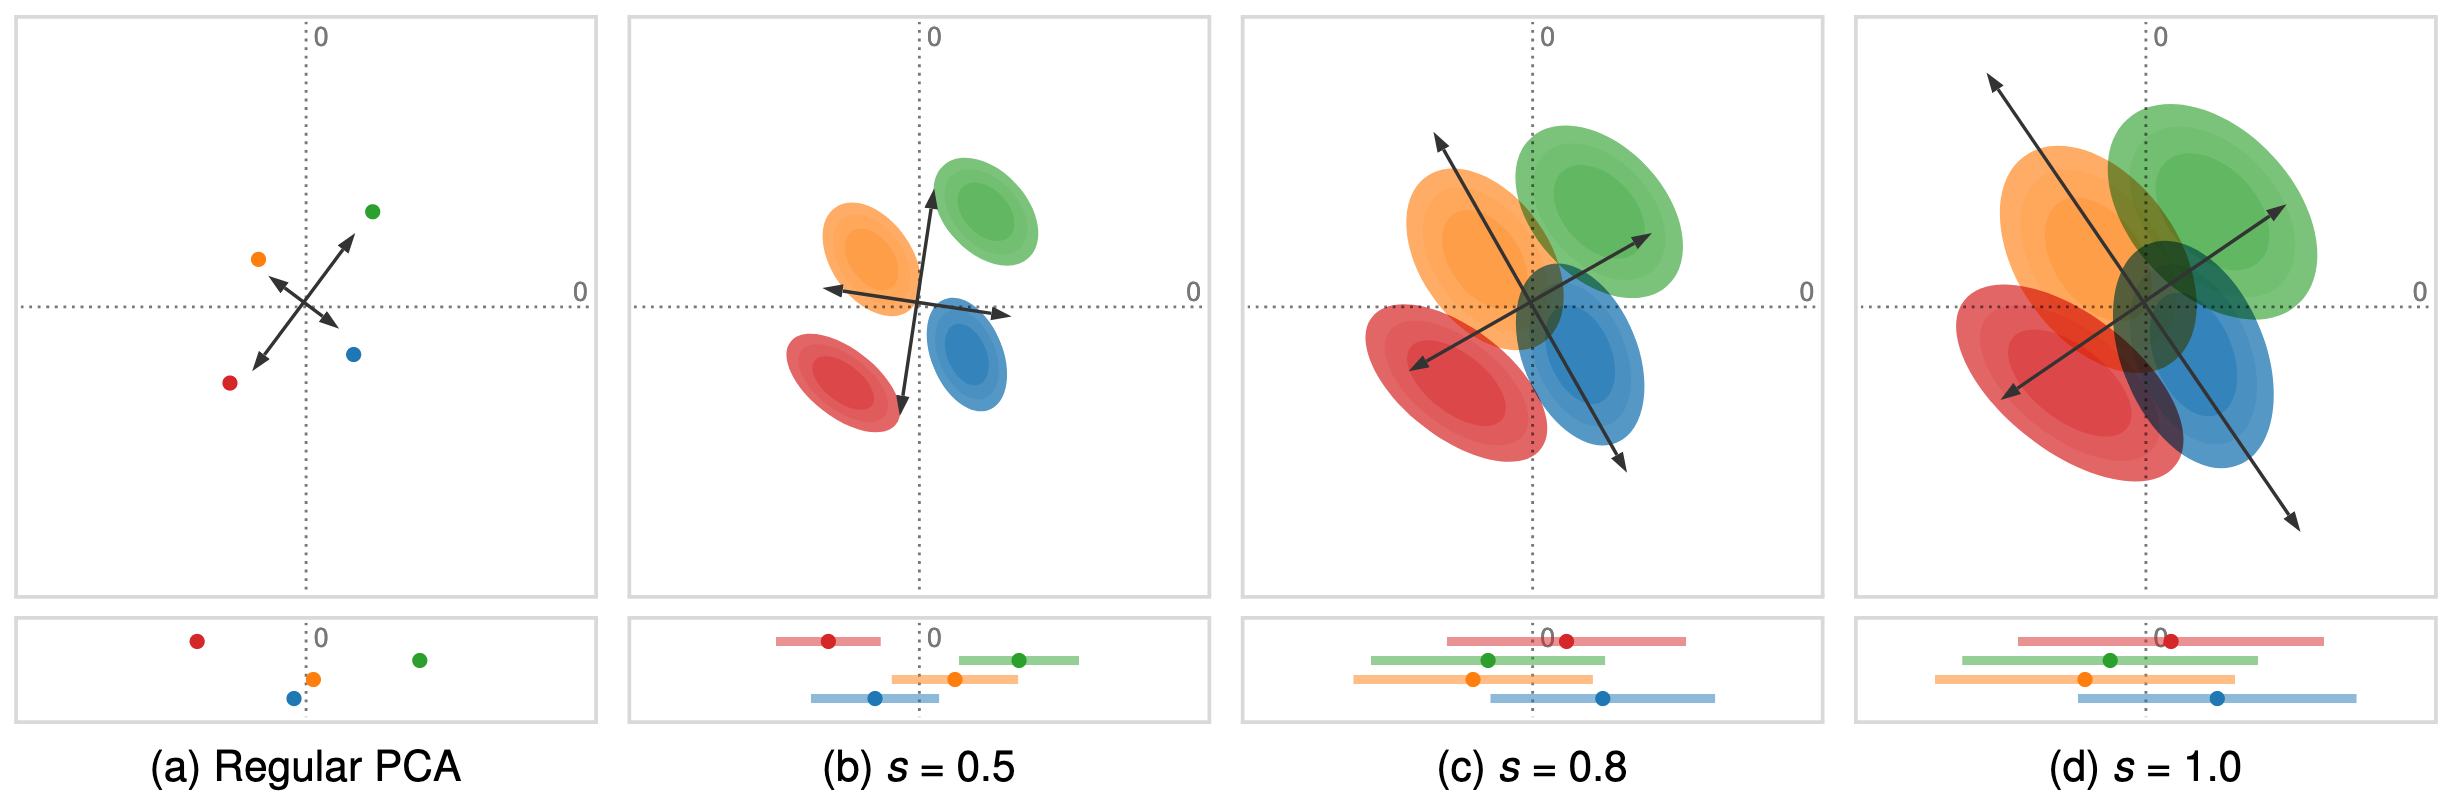 Uncertainty-Aware Principal Component Analysis. The data consists of multivariate probability distributions, the plots shows the impact of different levels of variance.